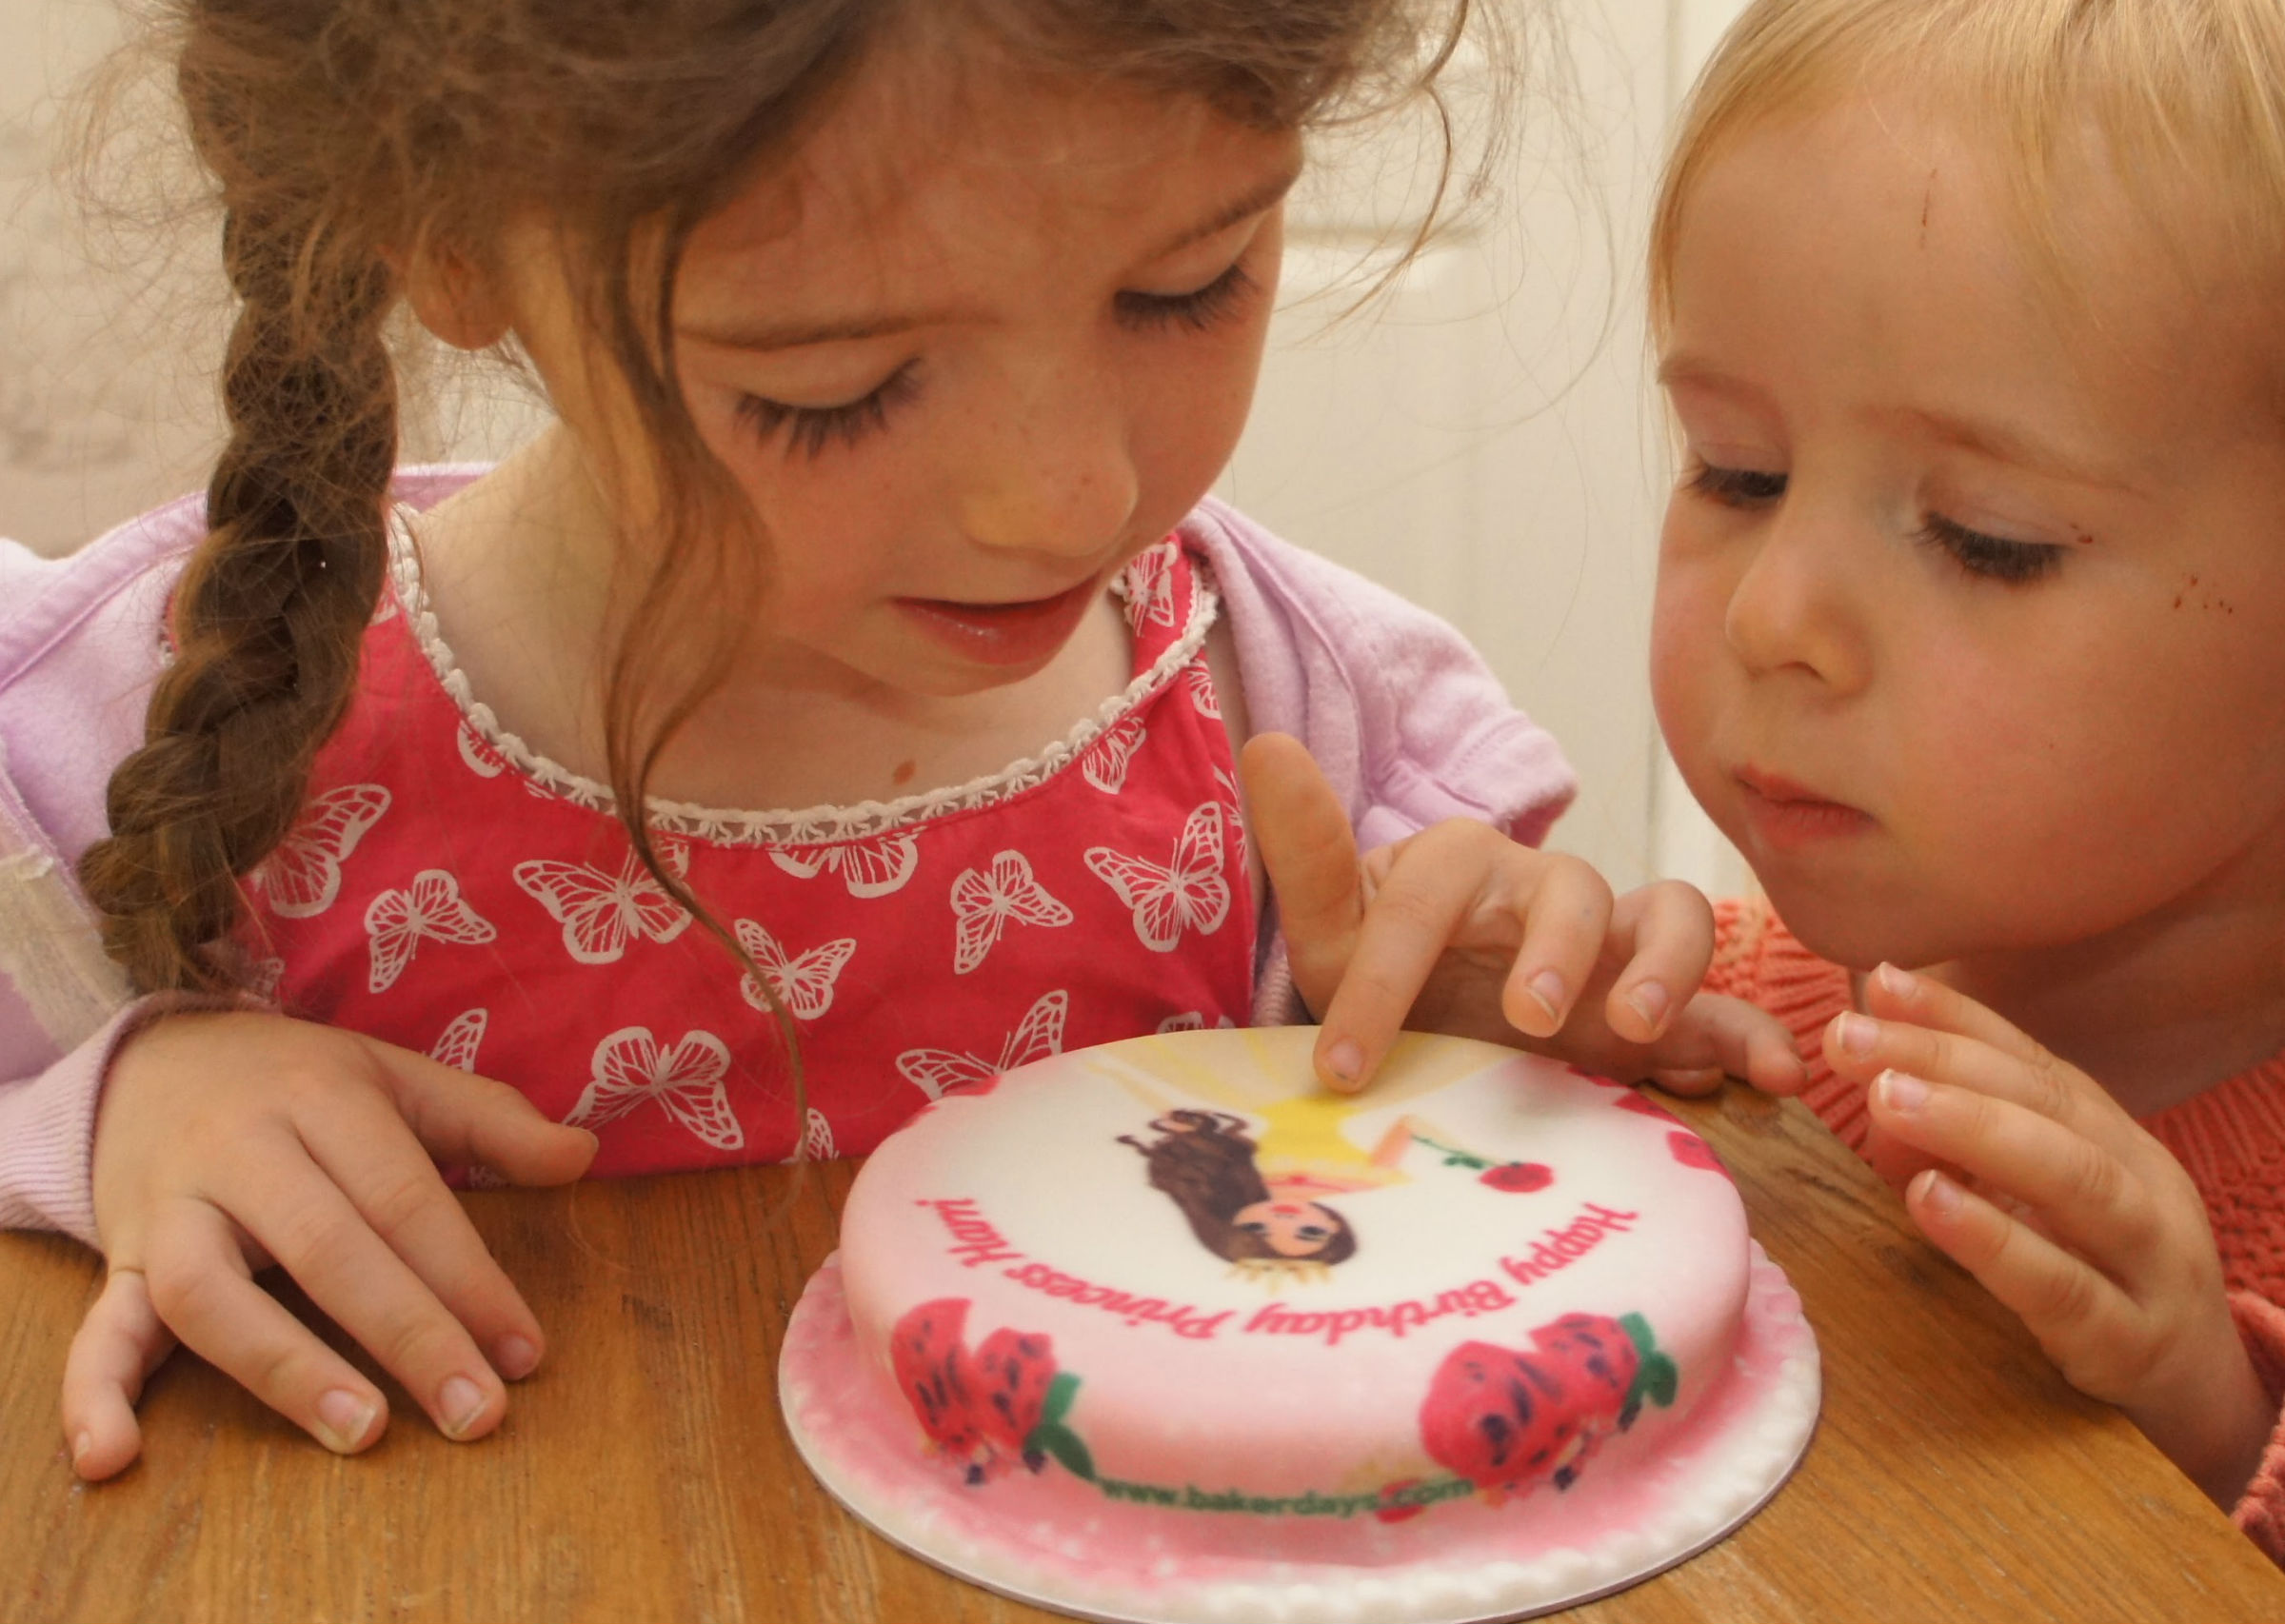 Personalised cakes: Bakerdays letterbox cake review | KiddyCharts